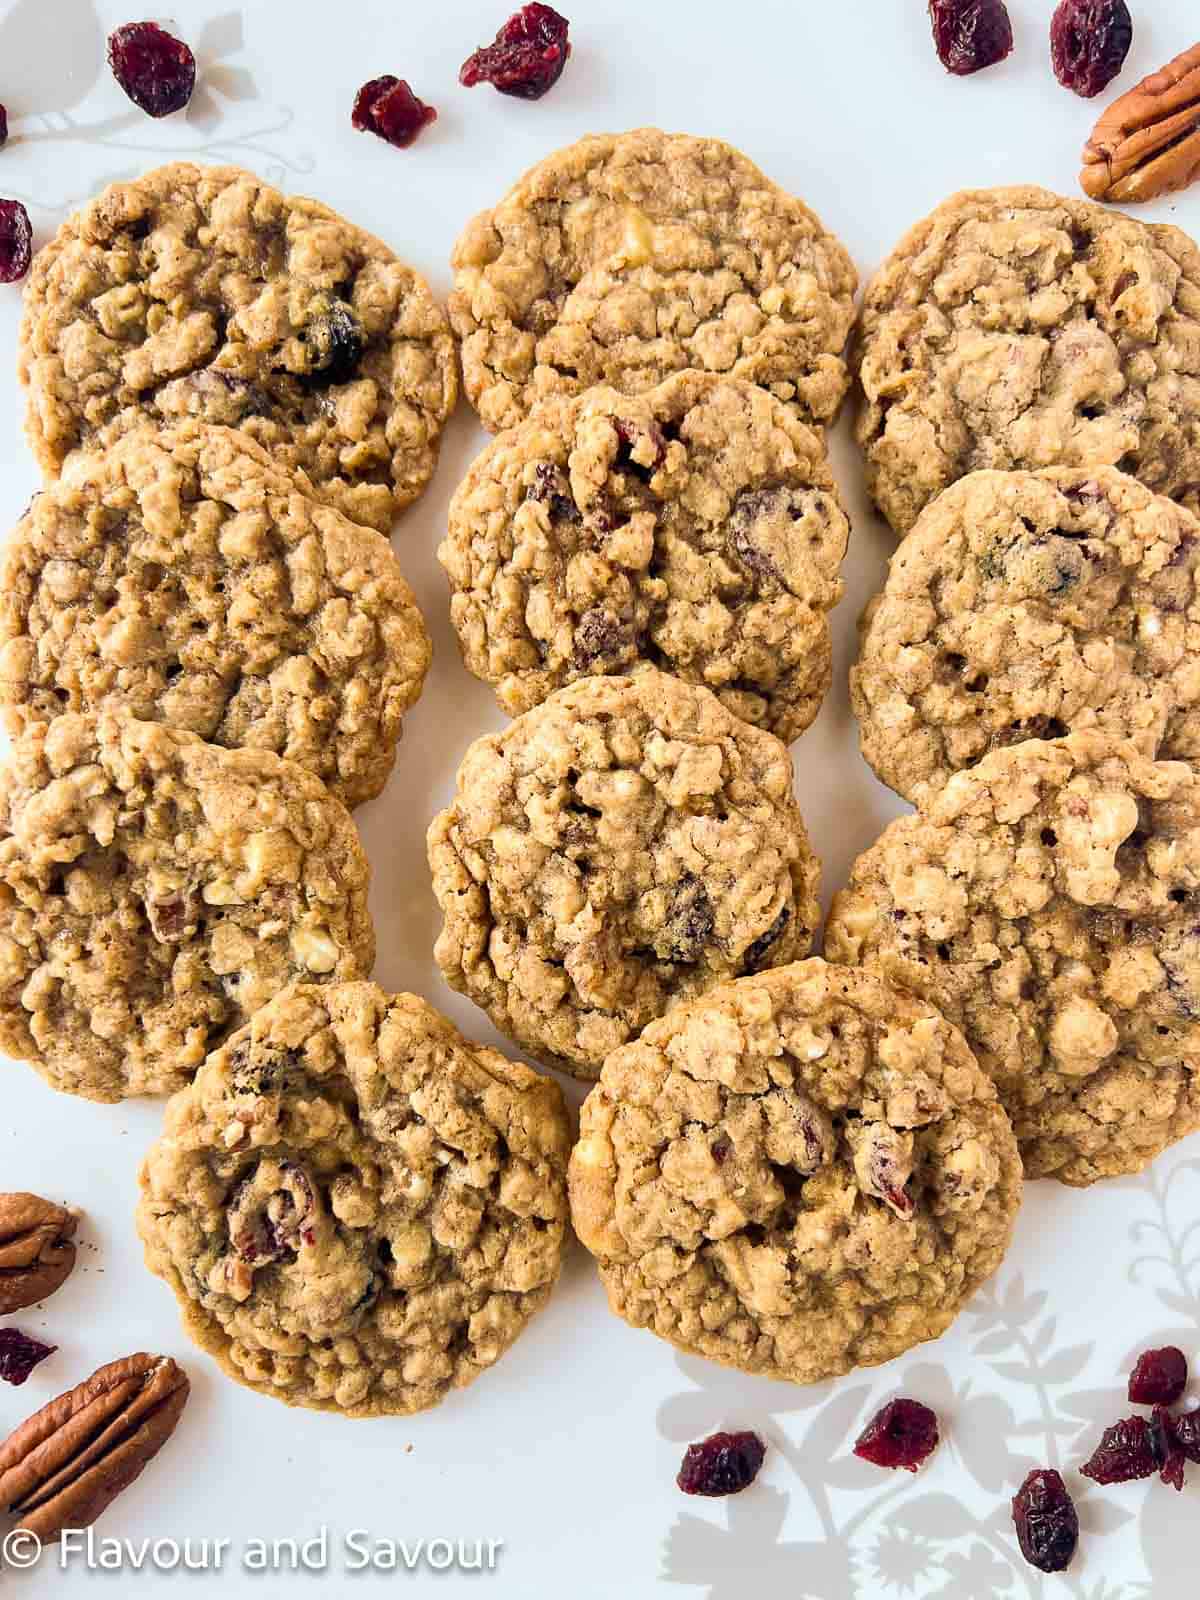 Gluten-free cranberry pecan white chocolate oatmeal cookies in rows on a serving plate.